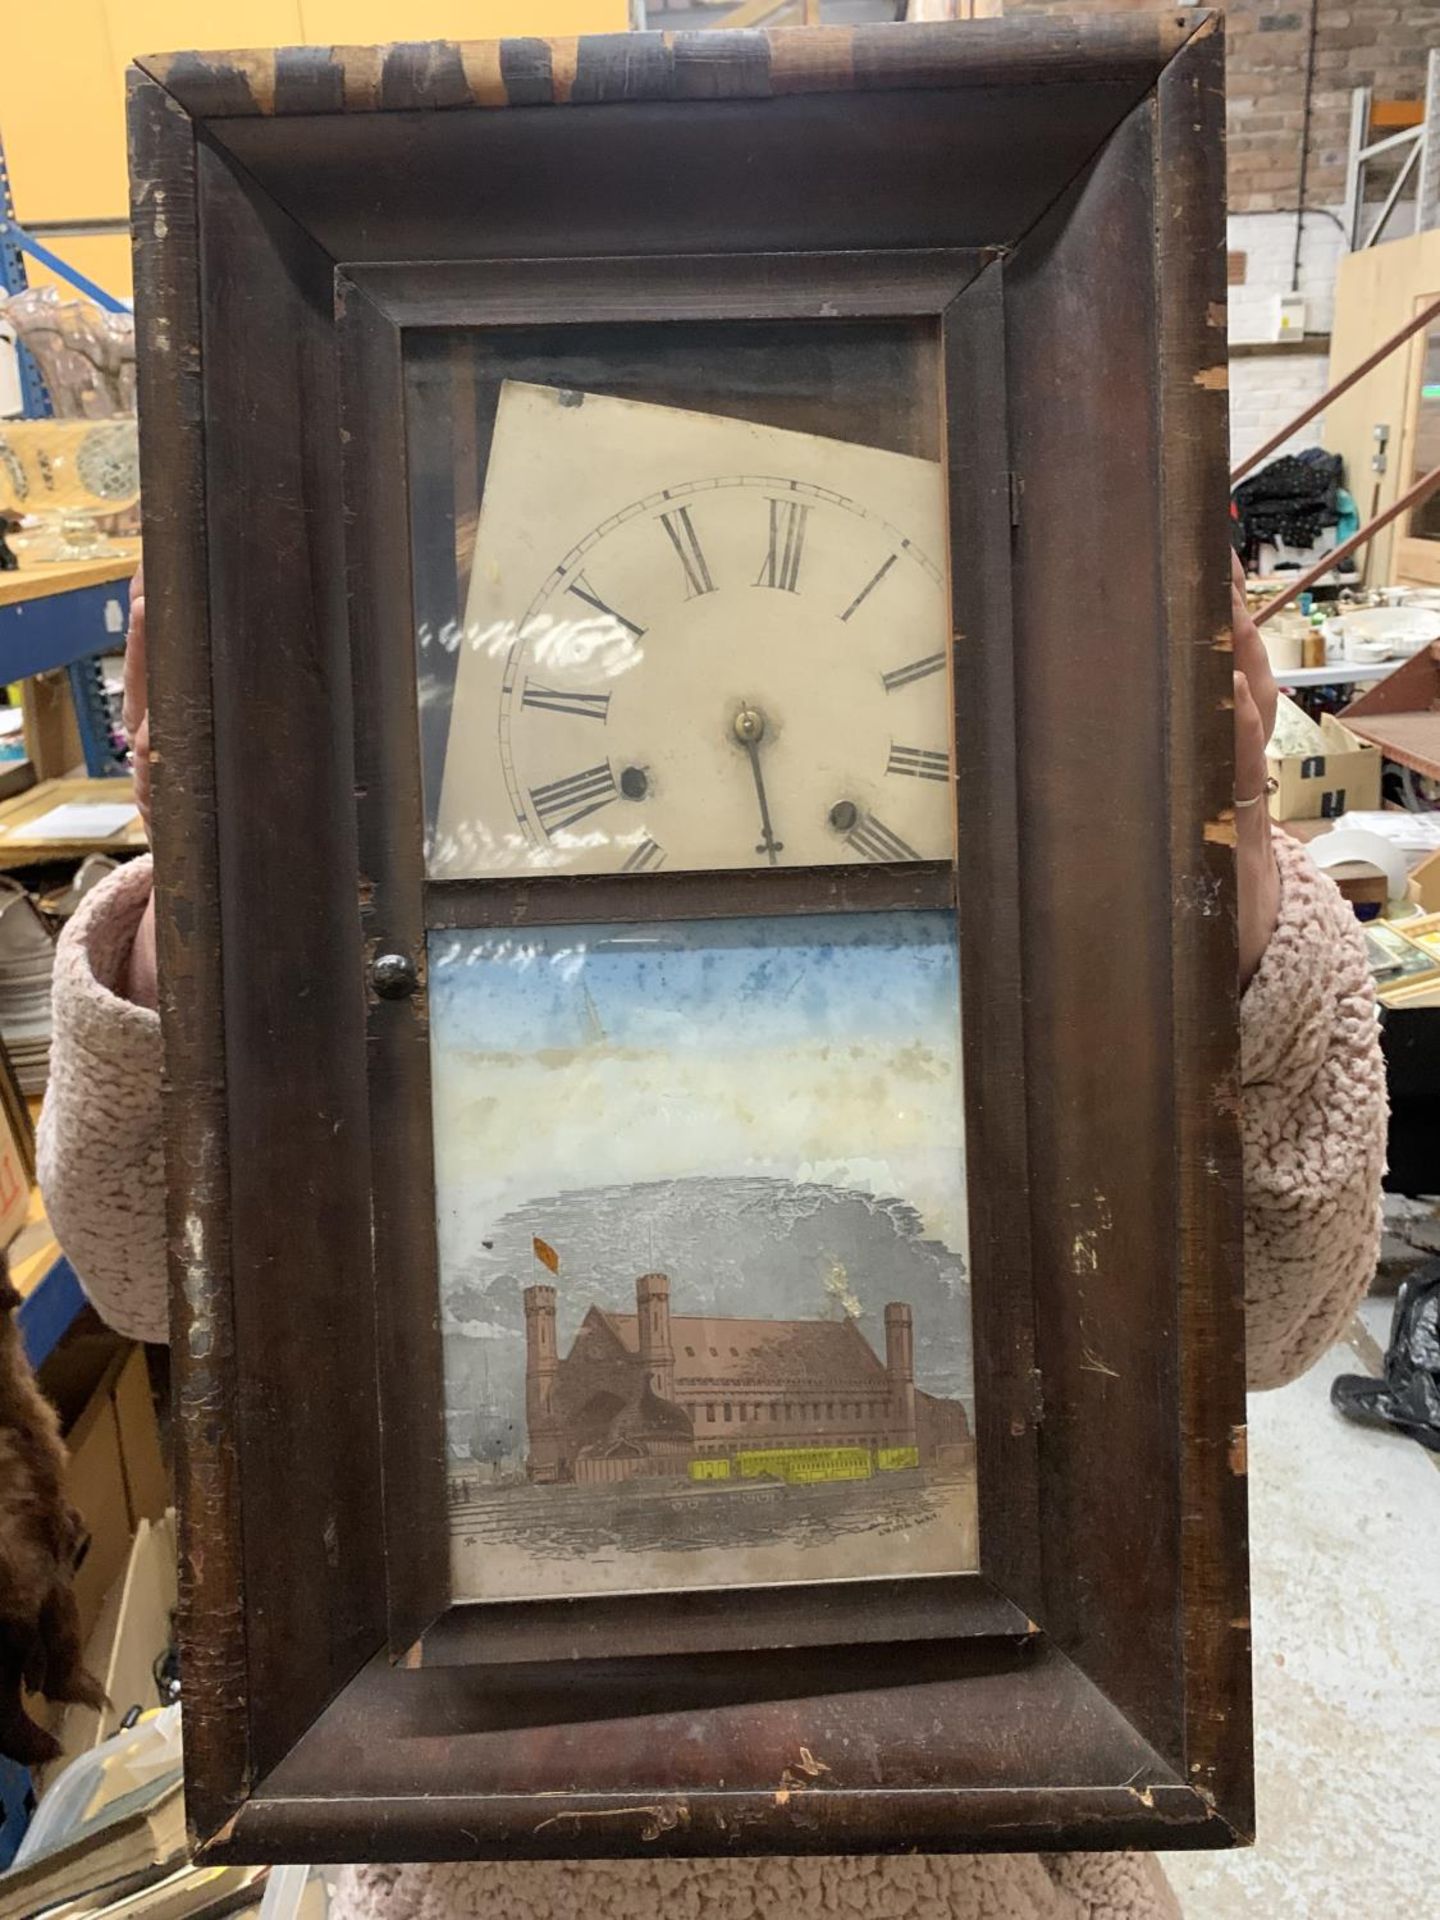 A VINTAGE JEROME & CO WALL CLOCK IN NEED OF RESTORATION